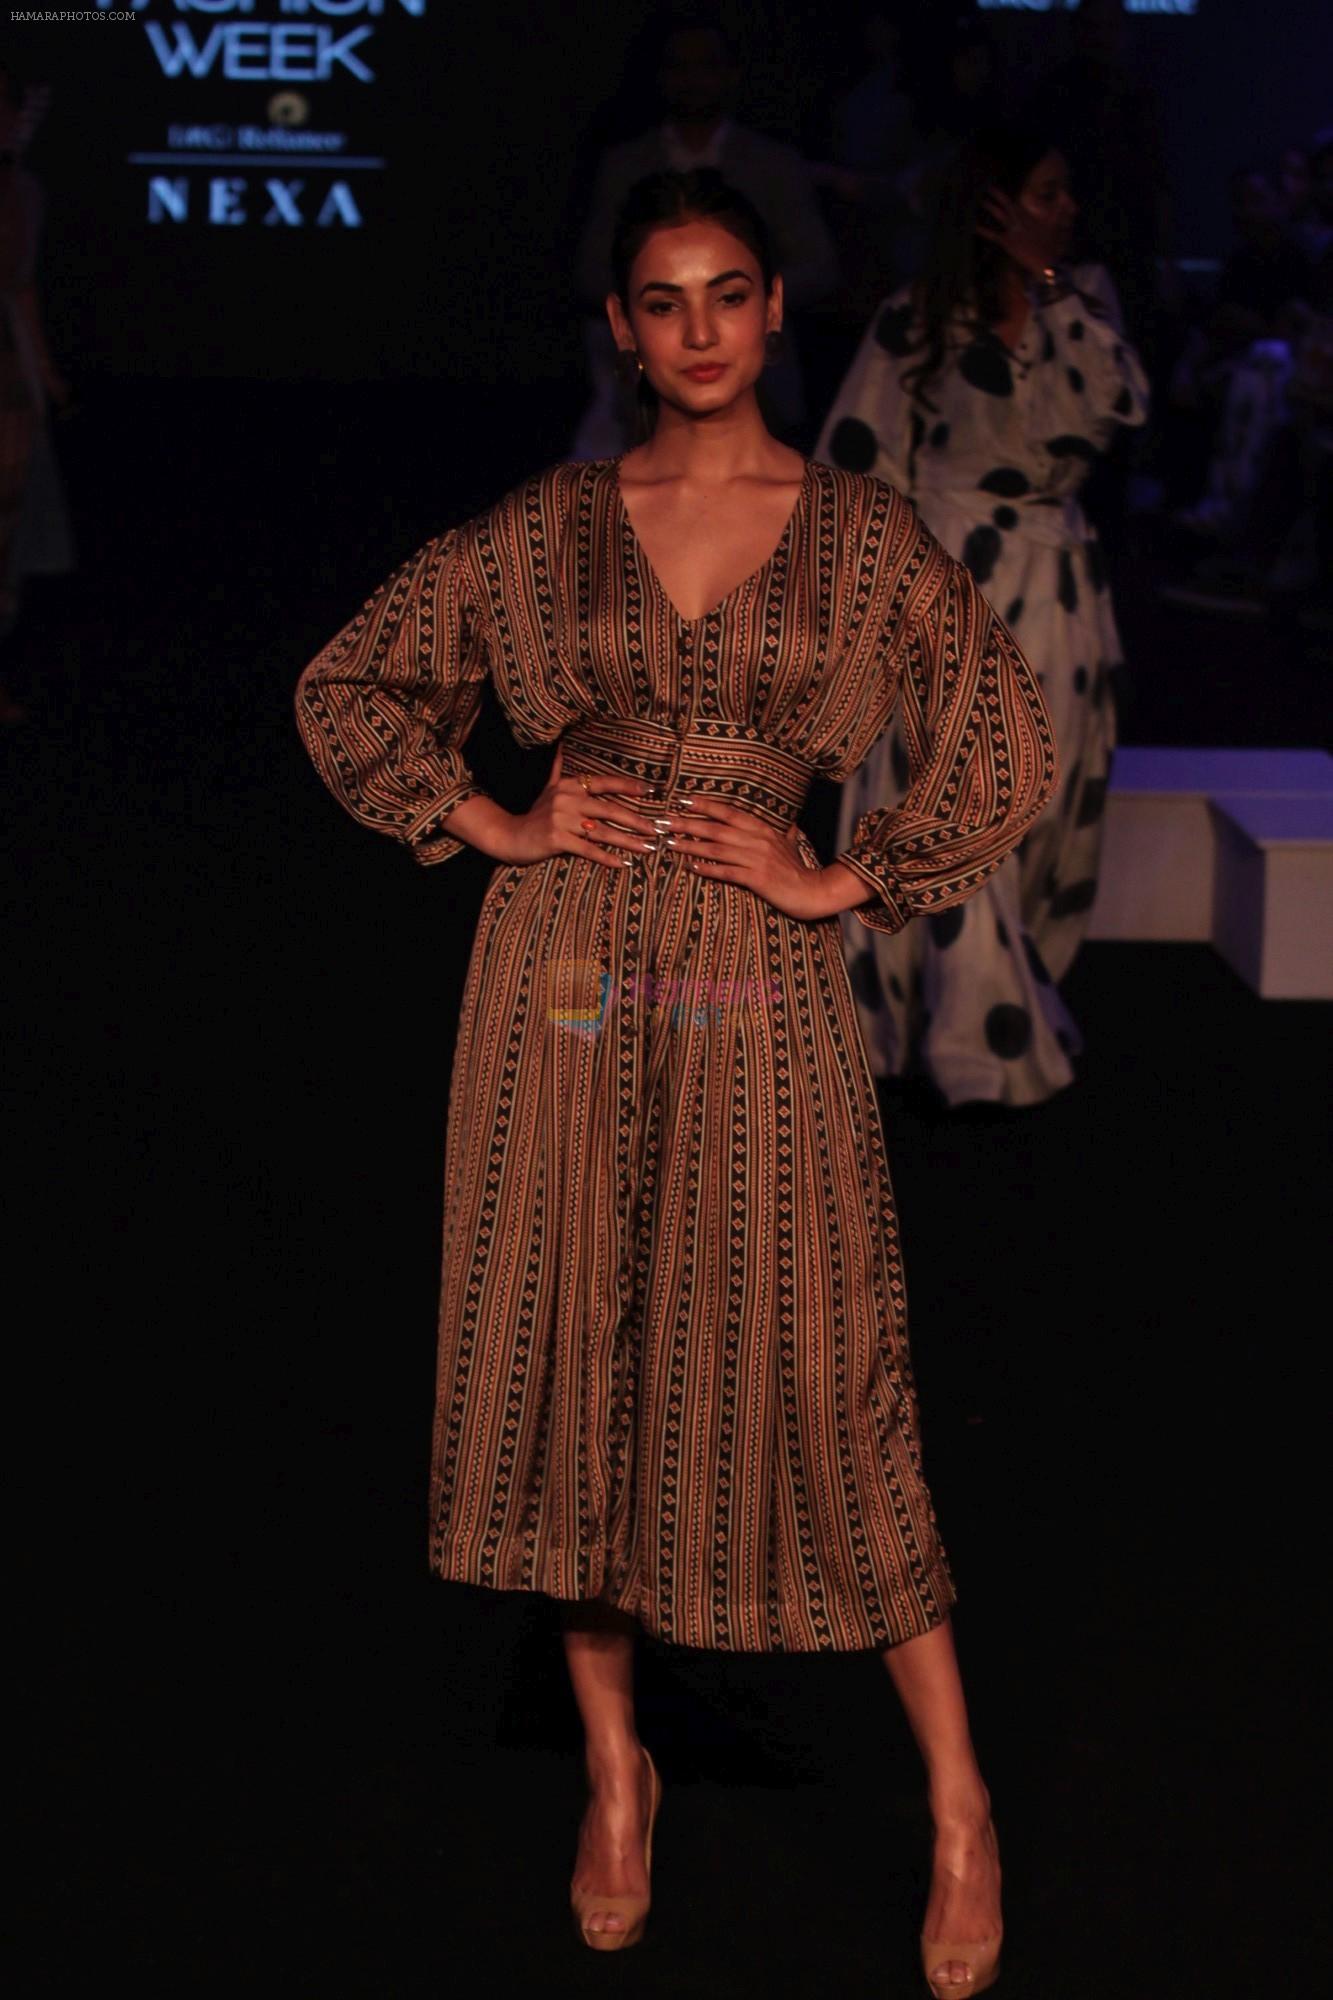 Sonal Chauhan walk the Ramp on Day 5 at Lakme Fashion Week 2019 on 3rd Feb 2019